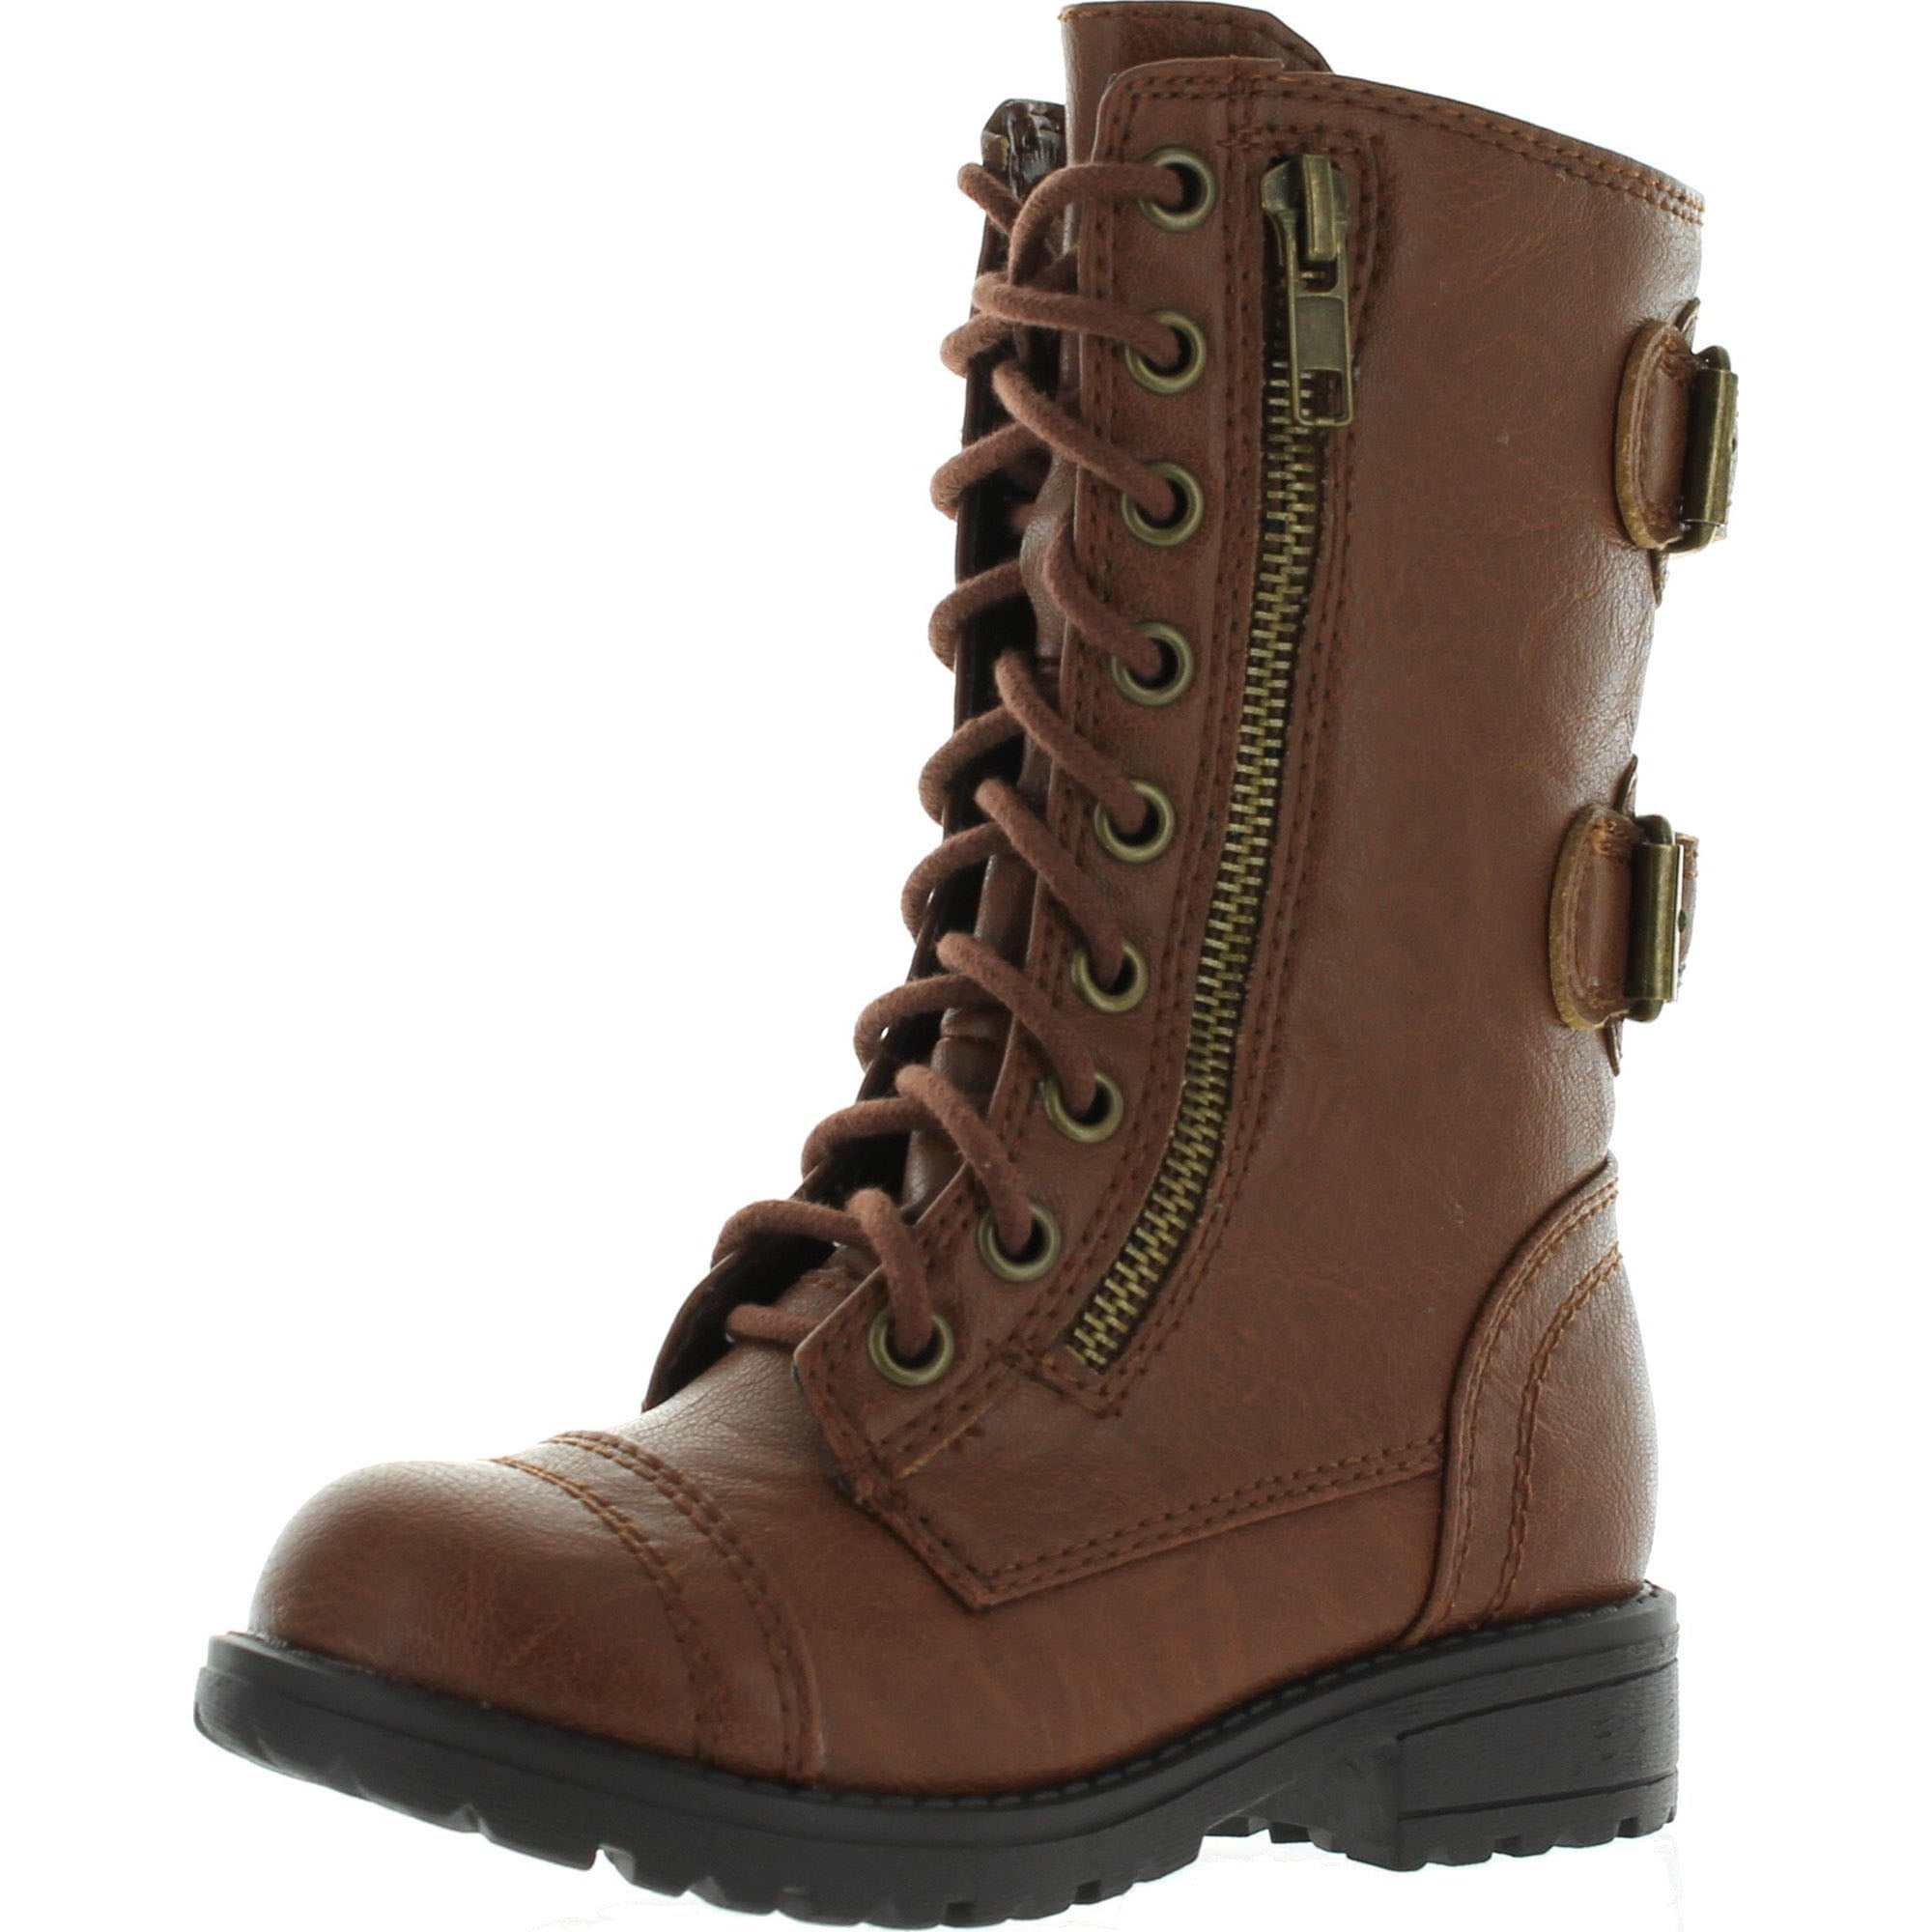 Girls Kids Lace Up Military Combat Boot Happy Soda Dome Black Tan Brown Beige 